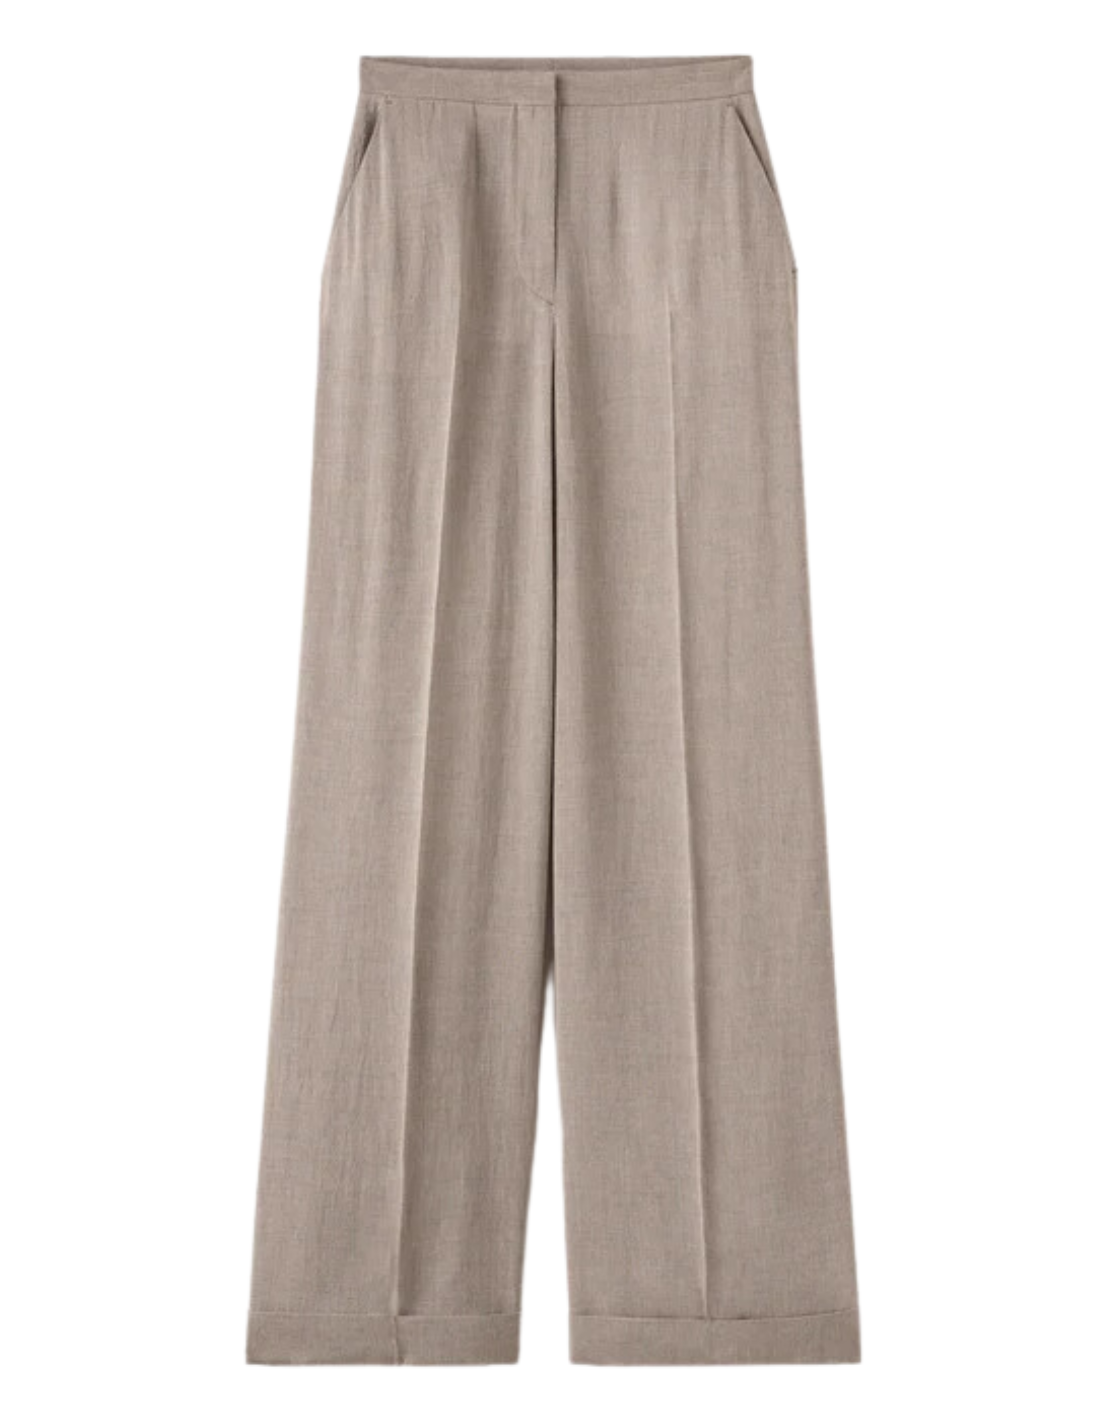 Toteme wide pants in blended cashmere - beige